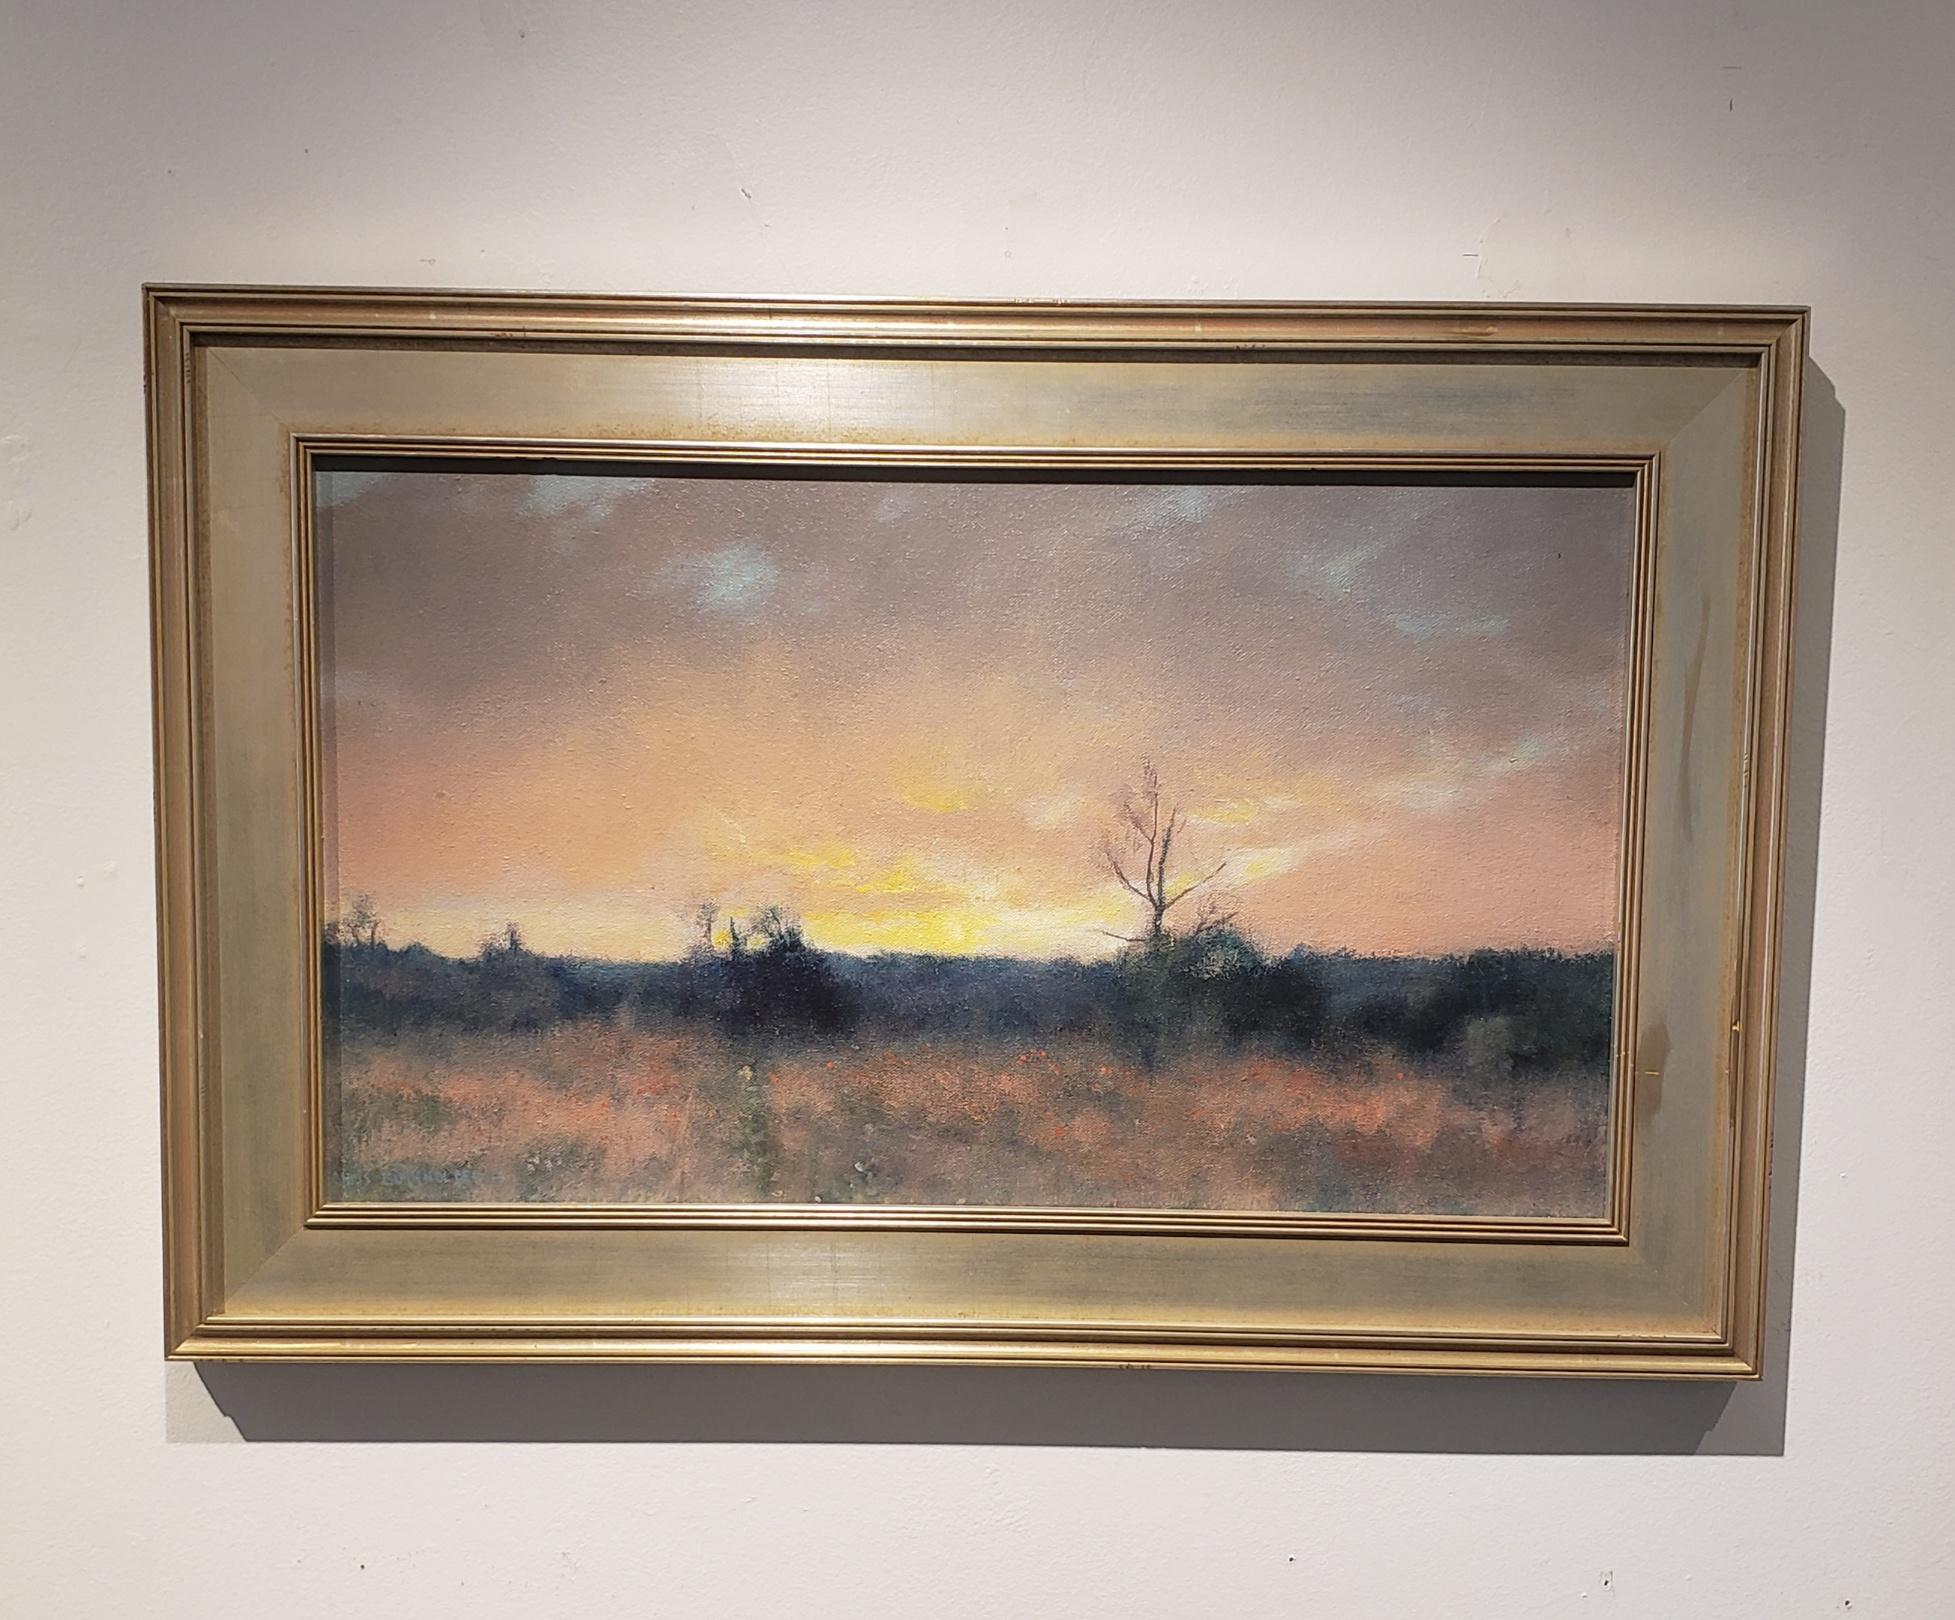 Chris Burkholder Landscape Painting - Far from the West, American Luminism, Texas Landscapes, ethereal landscapes